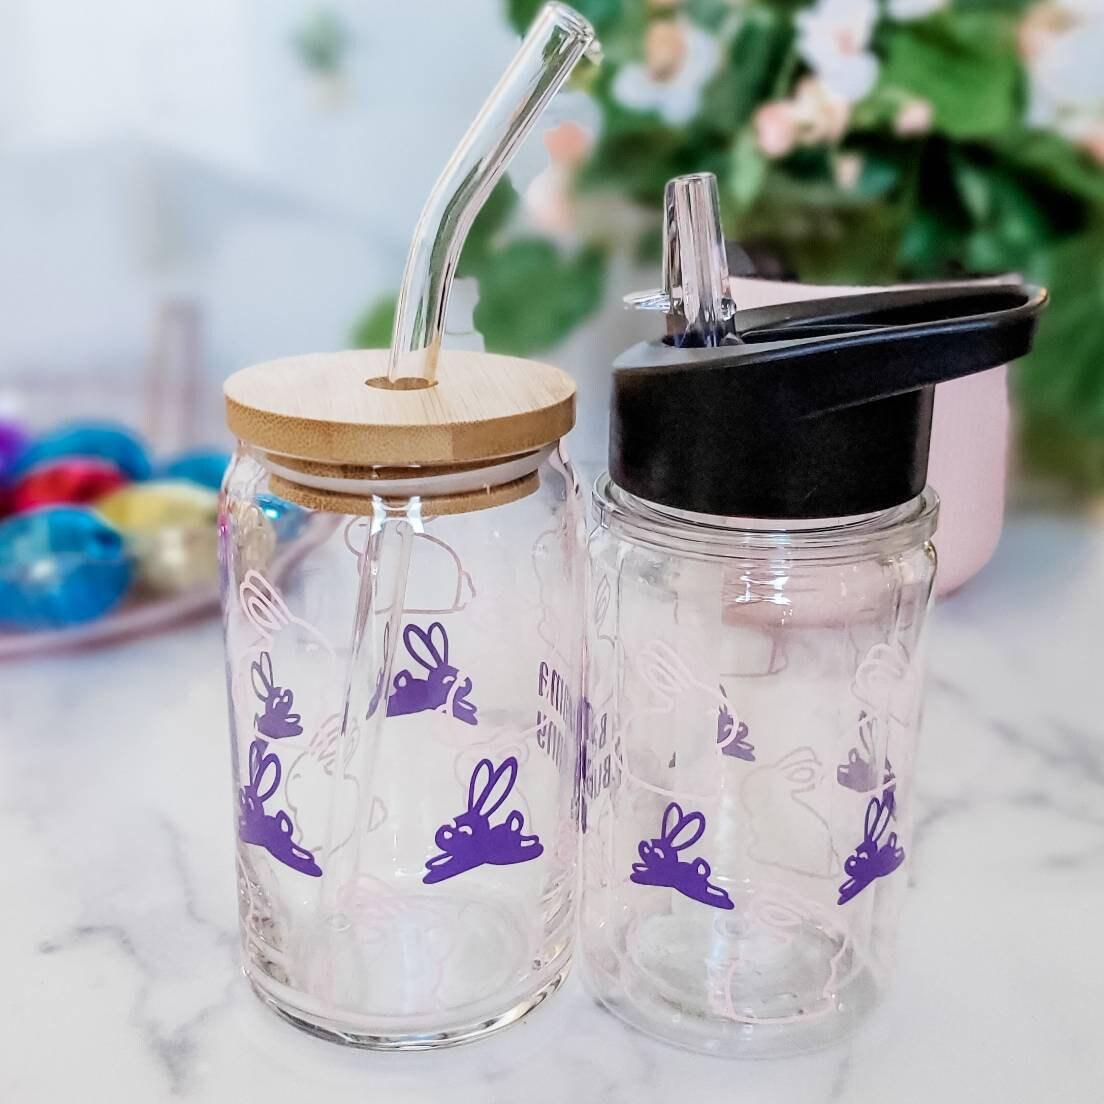 Mommy and Me Matching Bunny Drinkware Salt and Sparkle